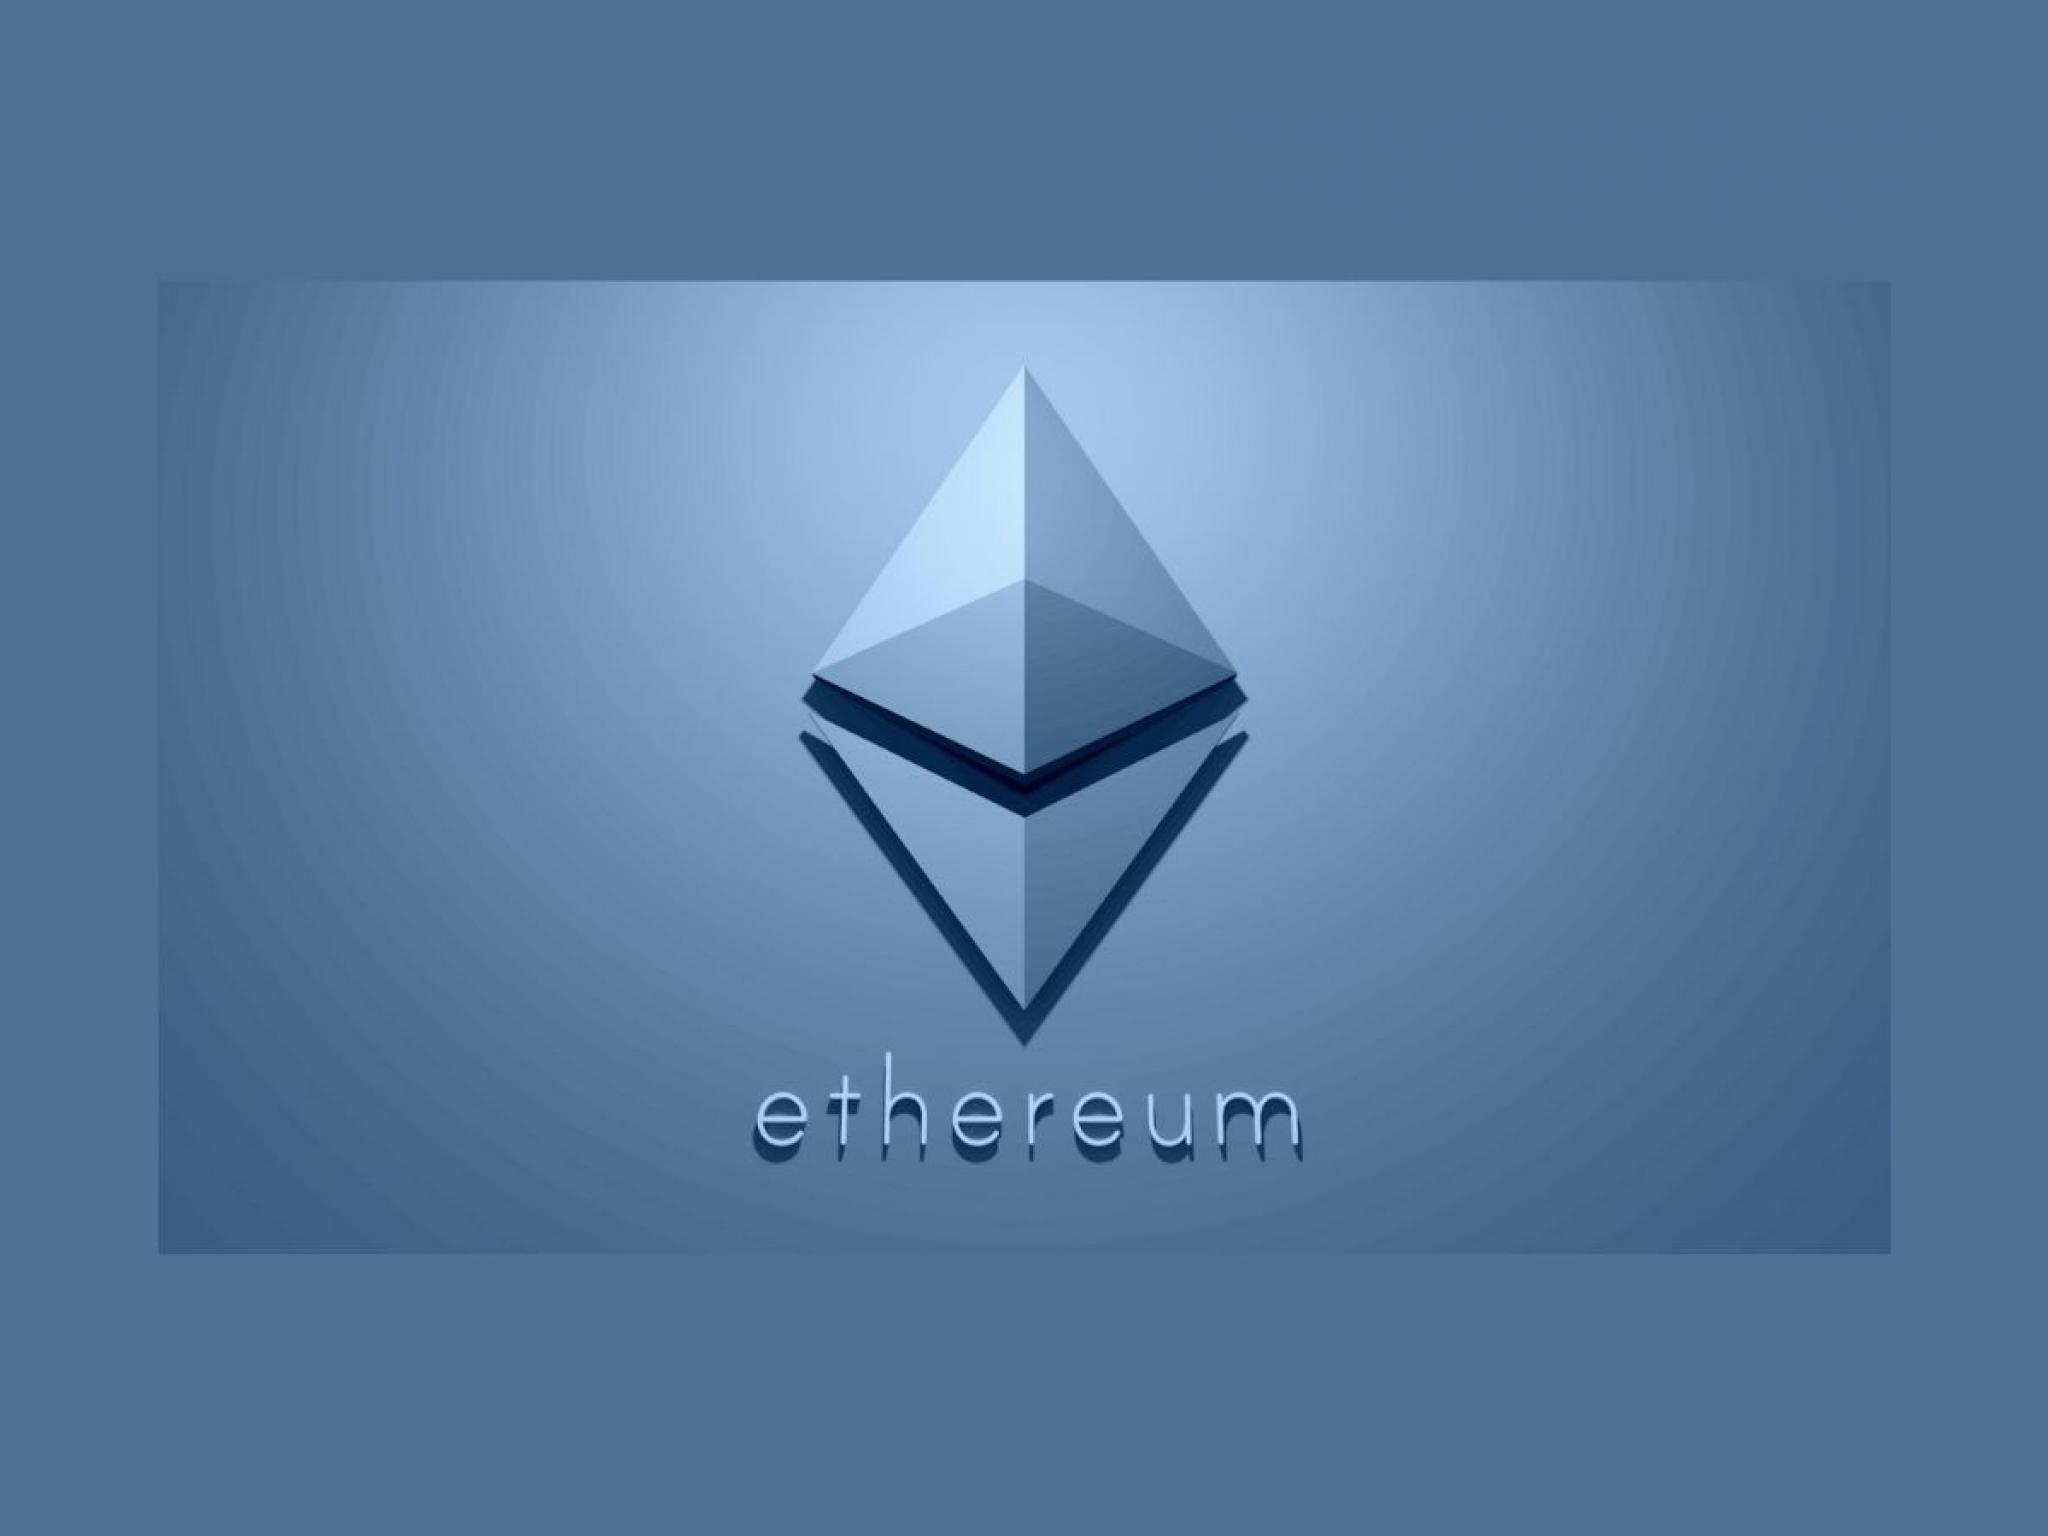  ethereum-tops-1600-maker-injective-among-top-gainers 